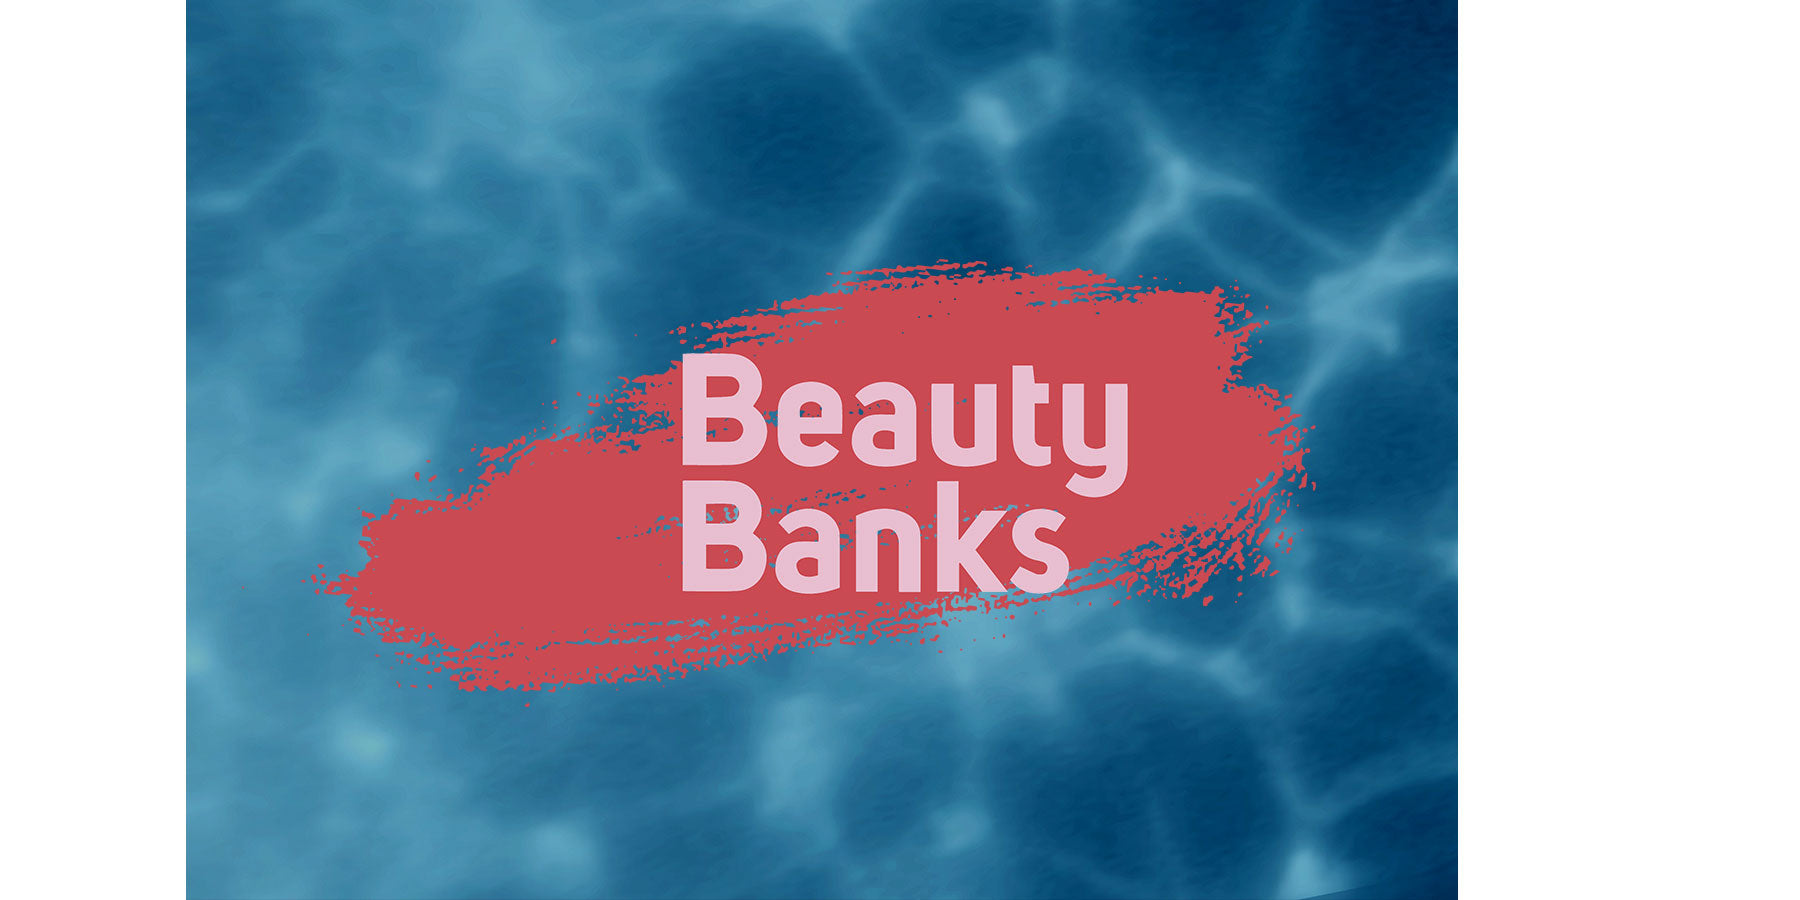 Our partnership with Beauty Banks.